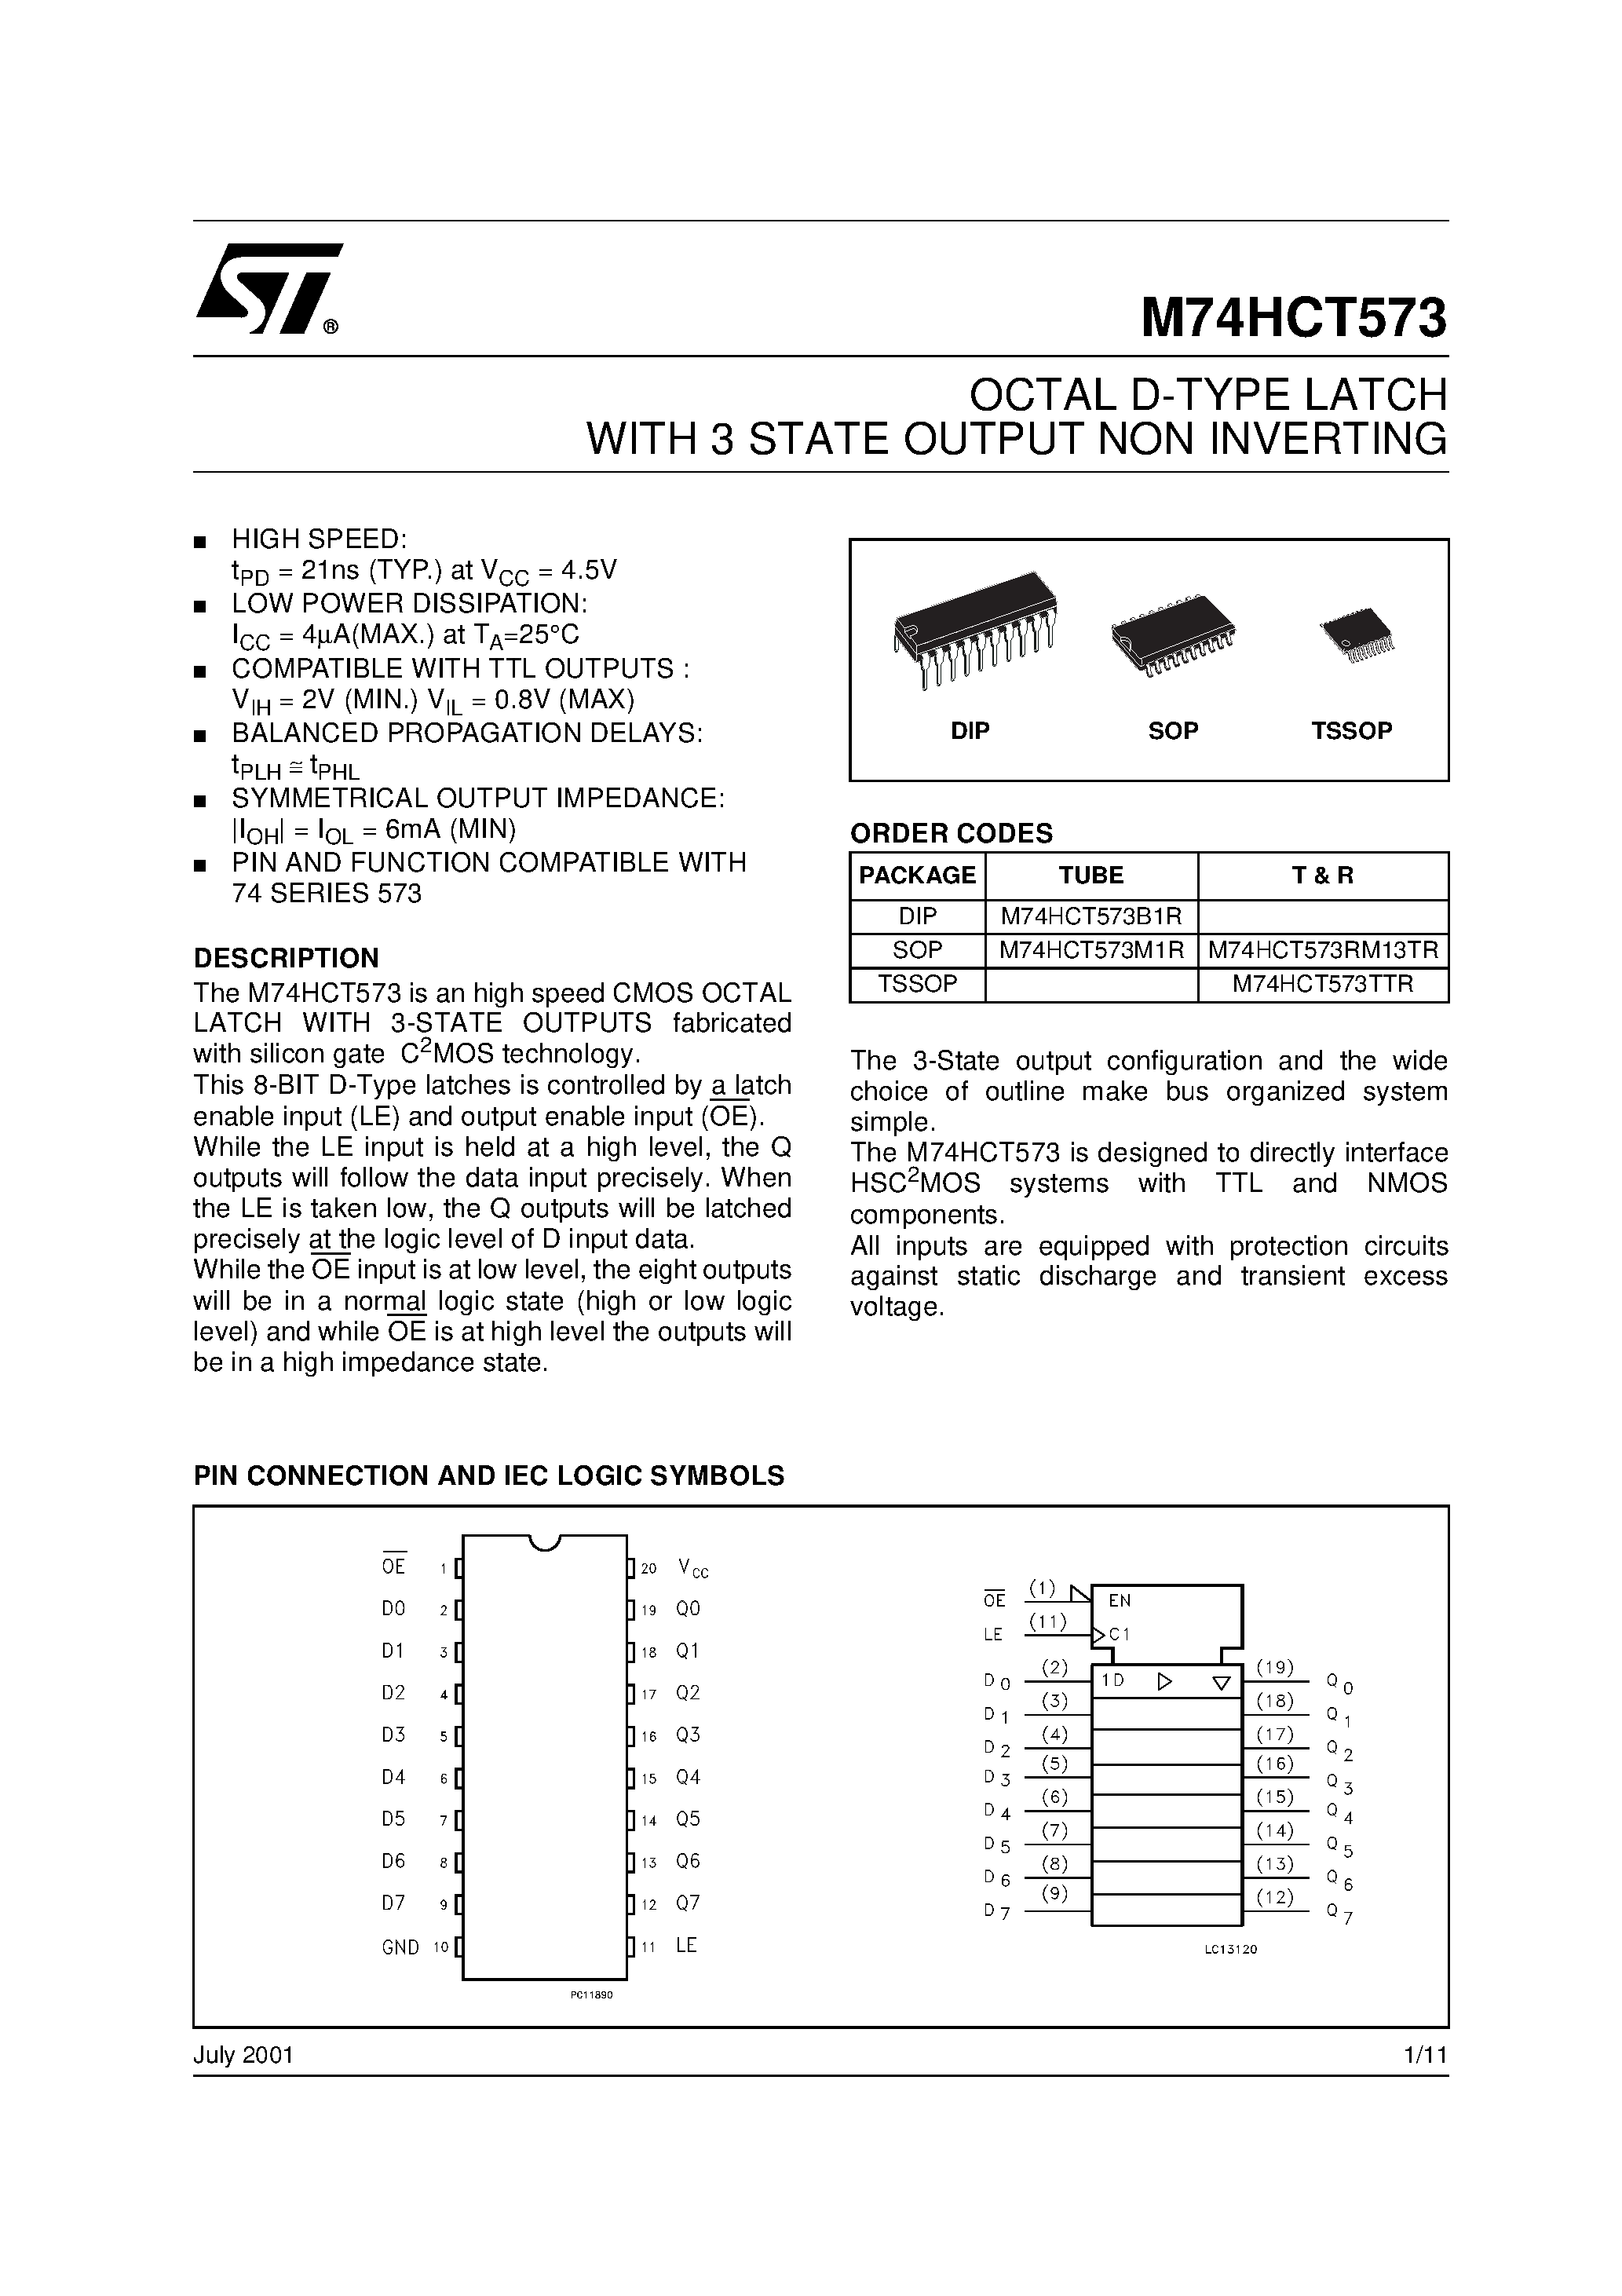 Даташит M74HCT573 - OCTAL D-TYPE LATCH WITH 3 STATE OUTPUT NON INVERTING страница 1